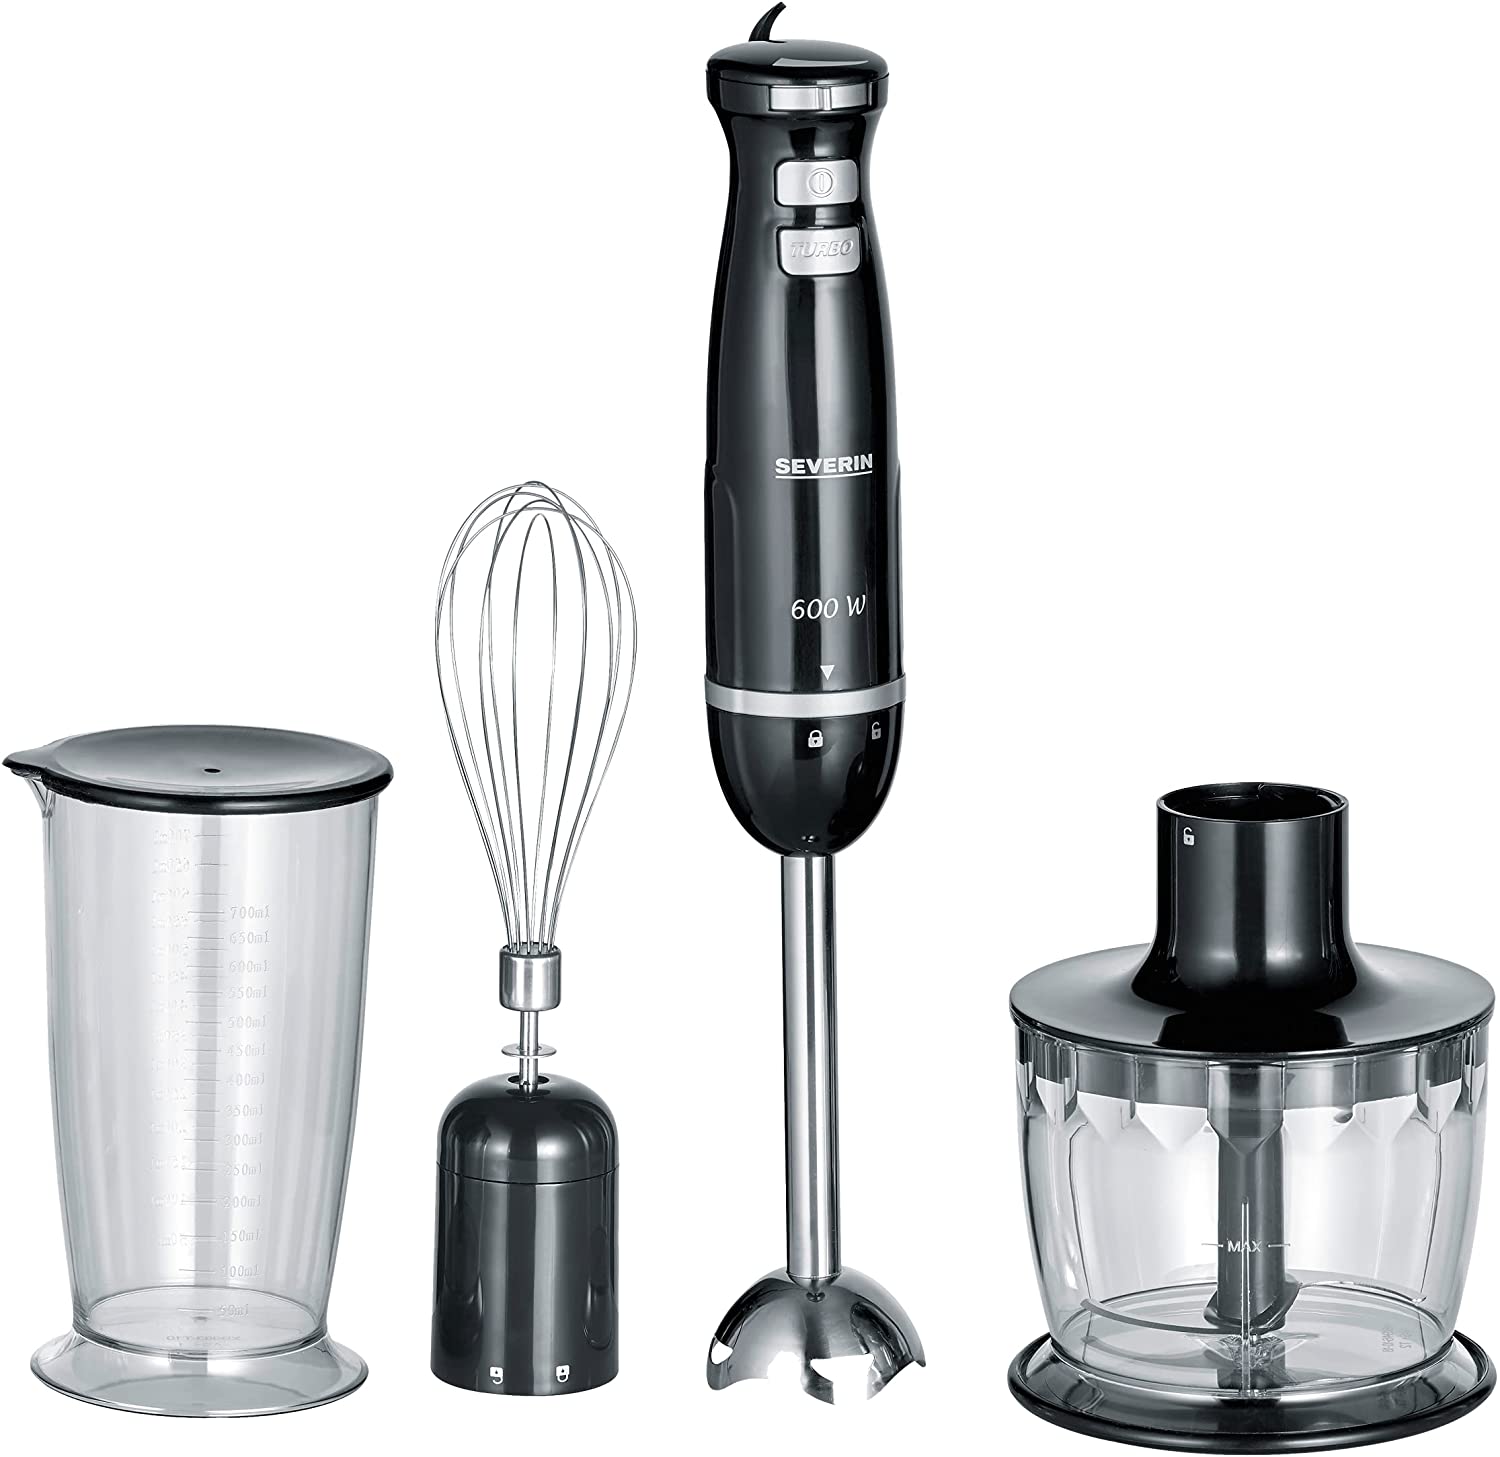 SEVERIN Hand Blender Kit 600W - Includes Mixing Cup with Lid, Whisk, Wall Mount, SM 3793, Stainless Steel/Black